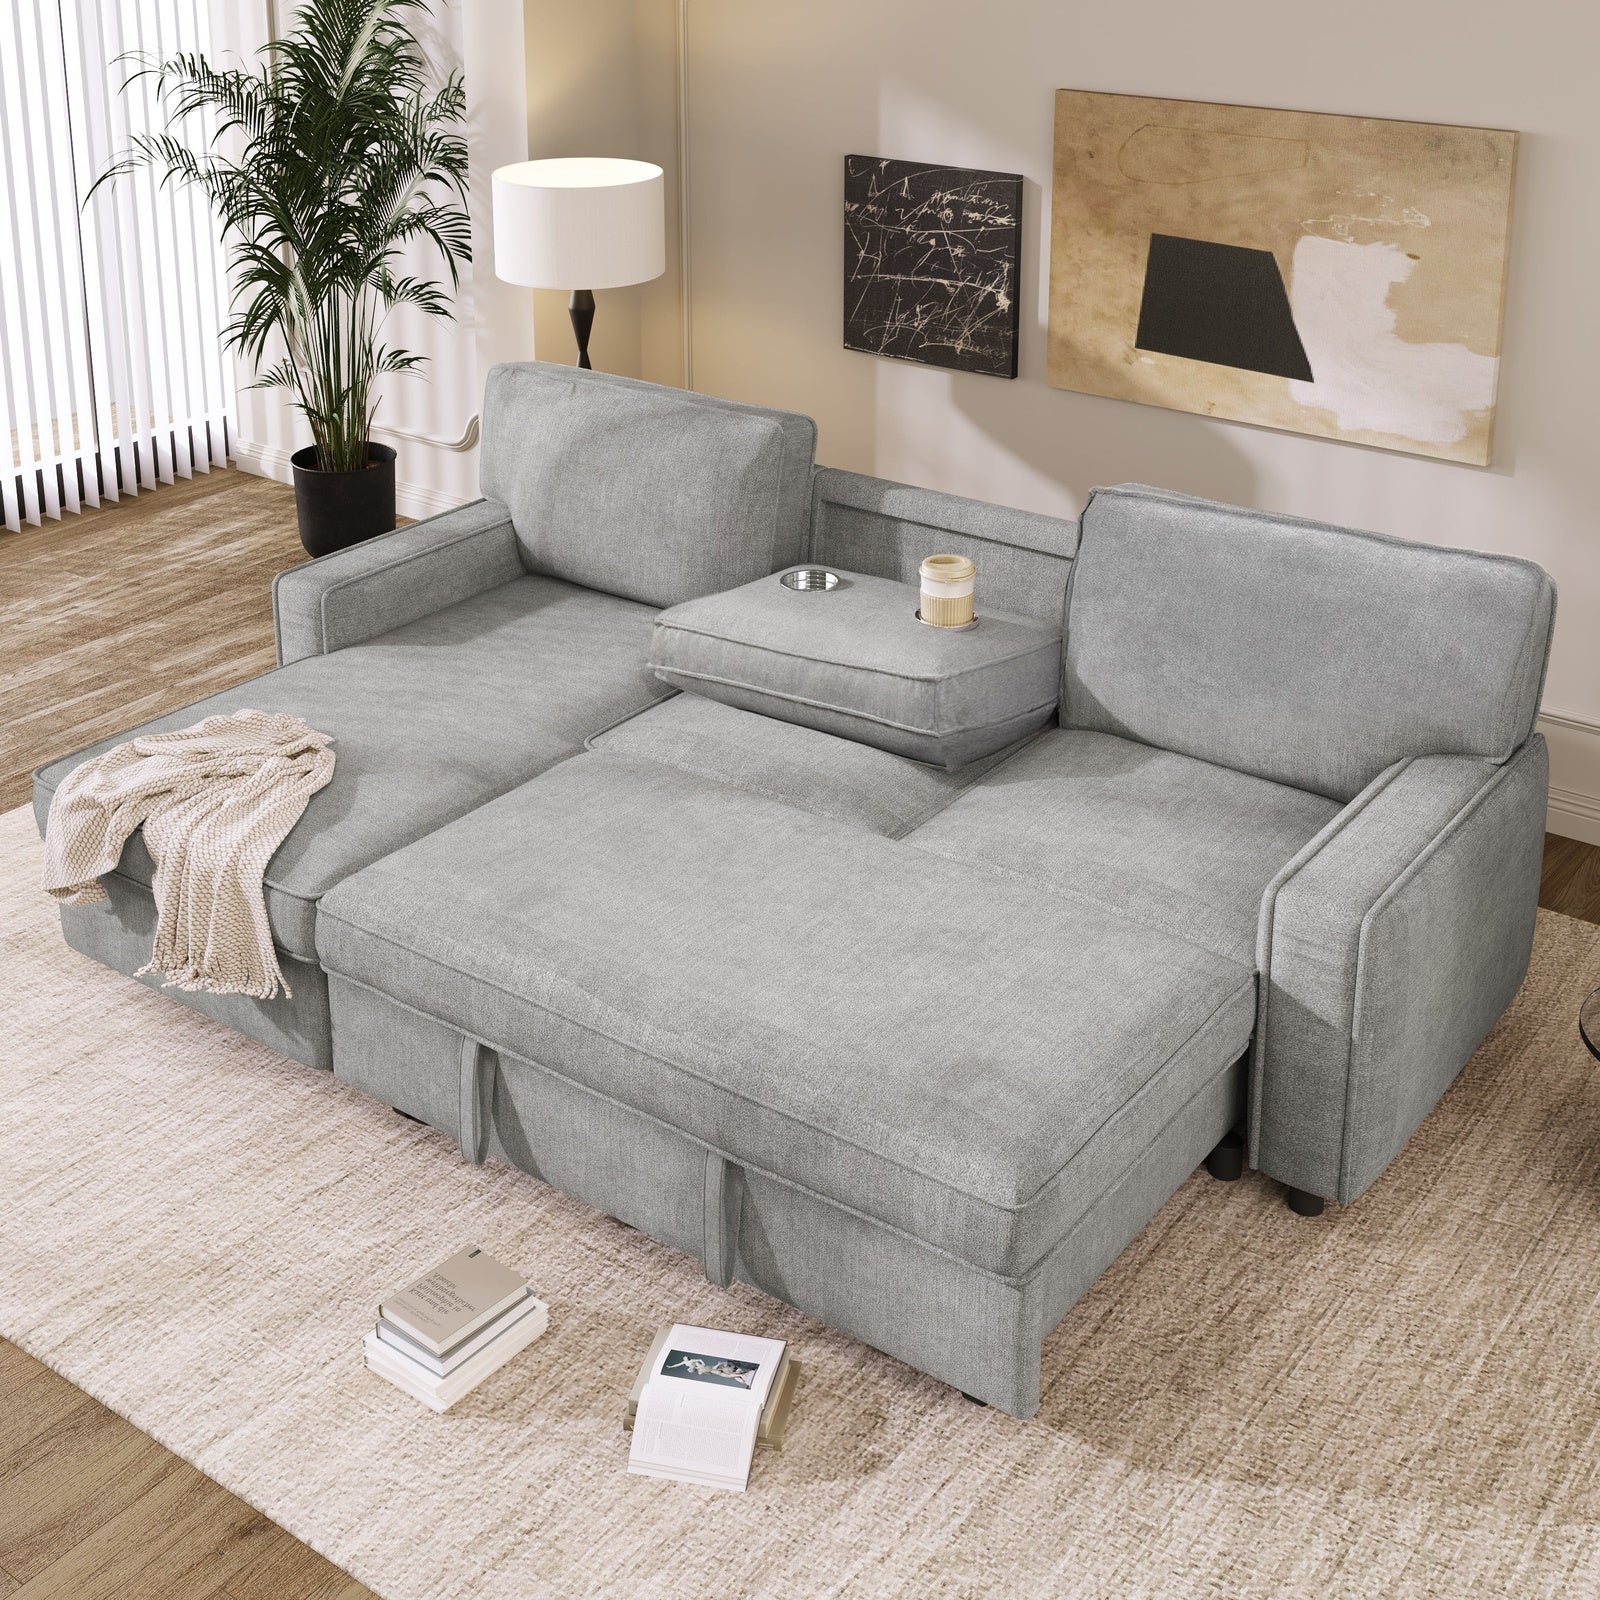 upholstery sectional sofa with storage space usb port and 2 cup holderssofas 843501